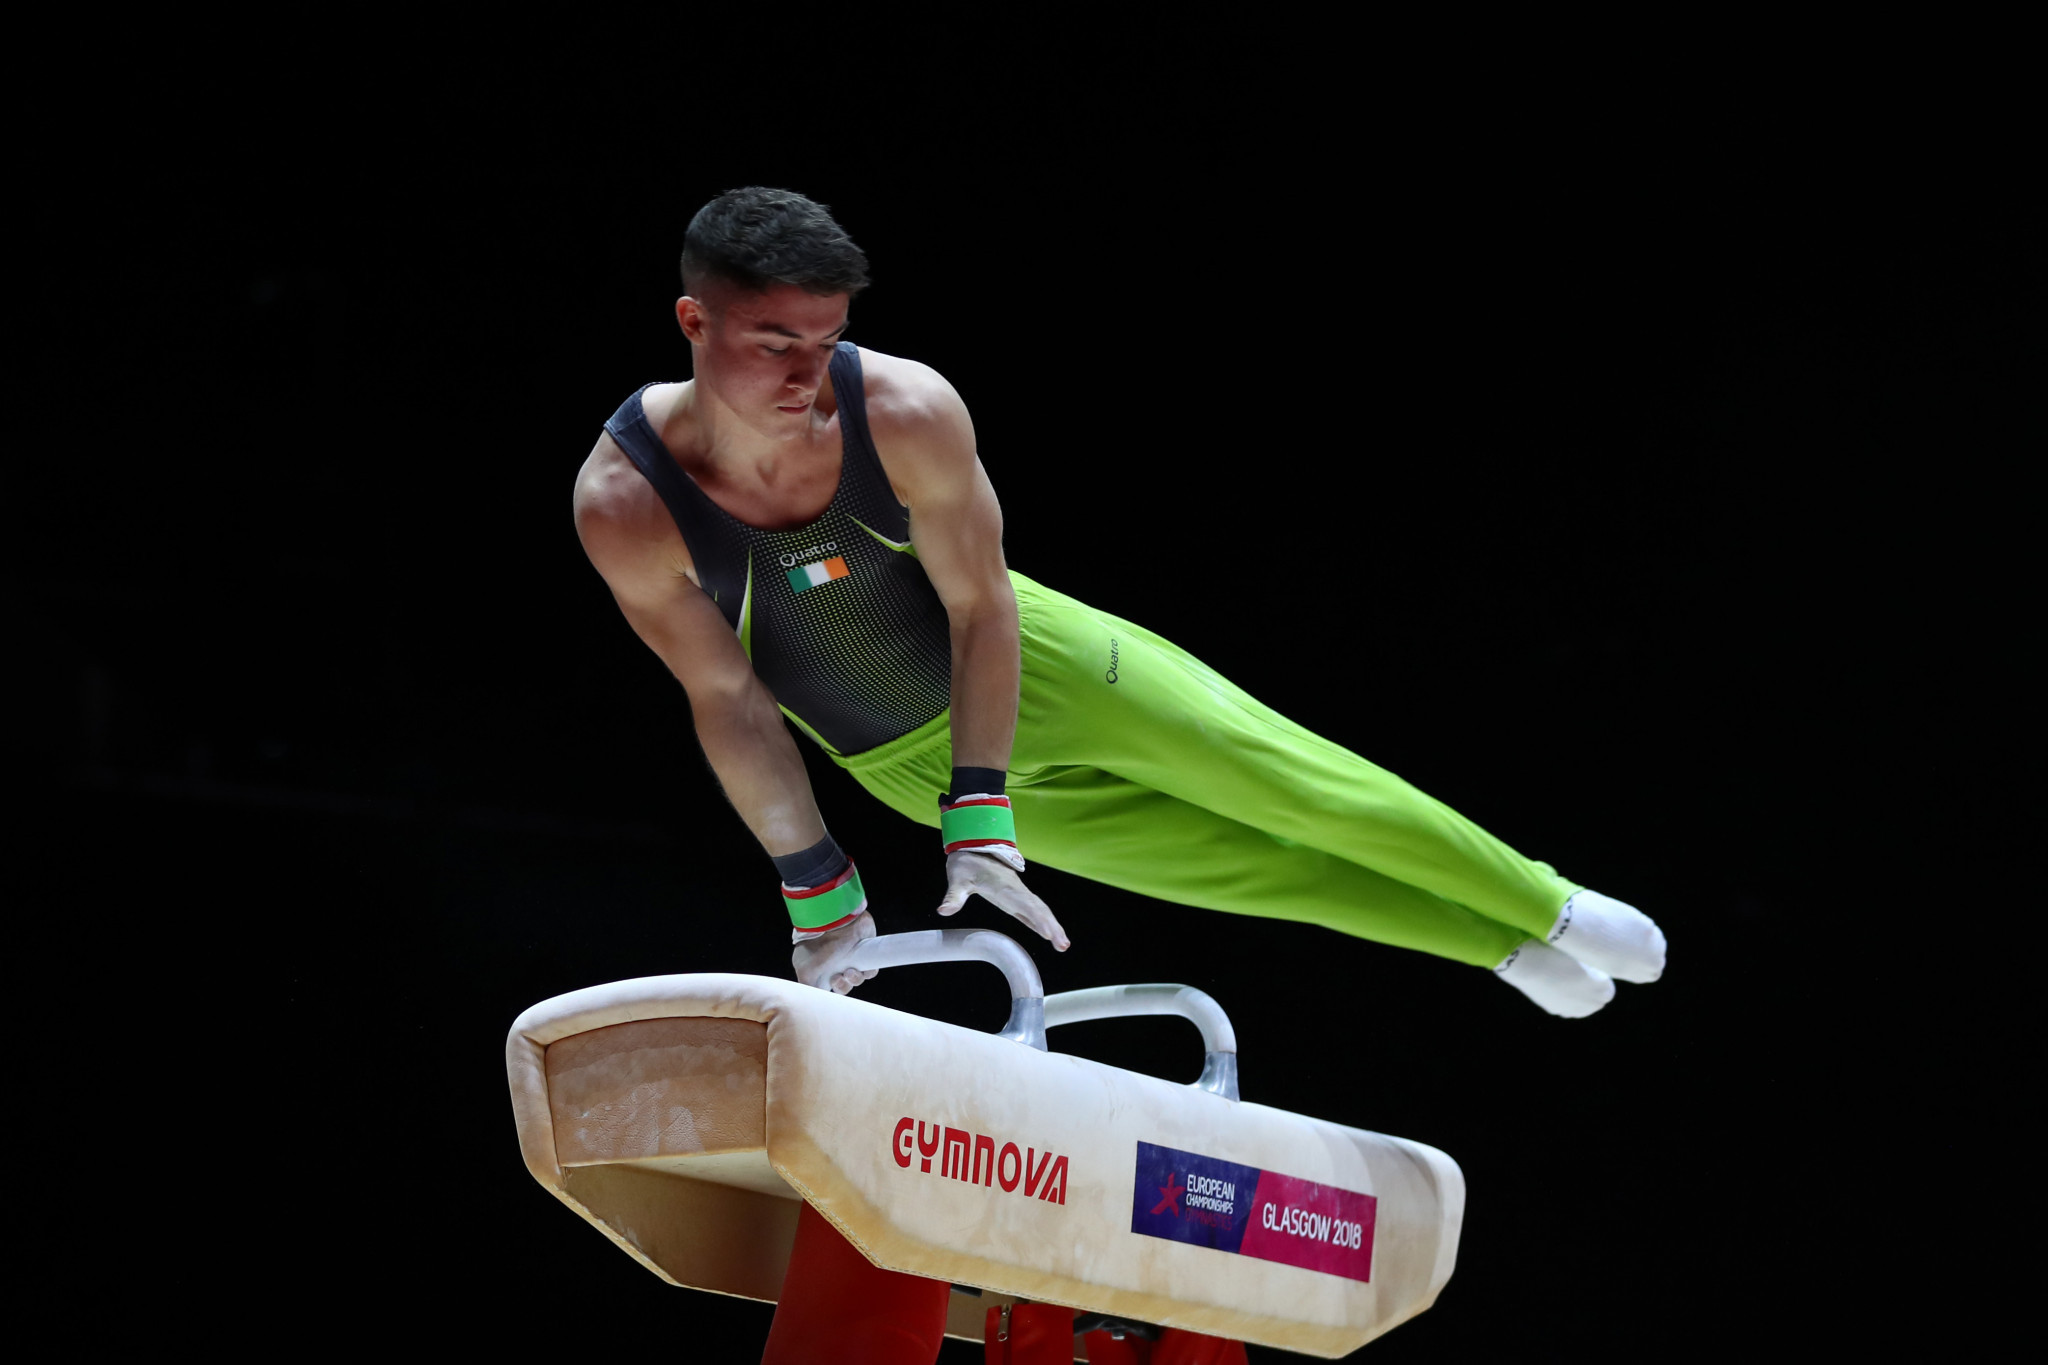 Ireland's Rhys McClenaghan was the strongest performer in men's pommel horse qualification ©Getty Images